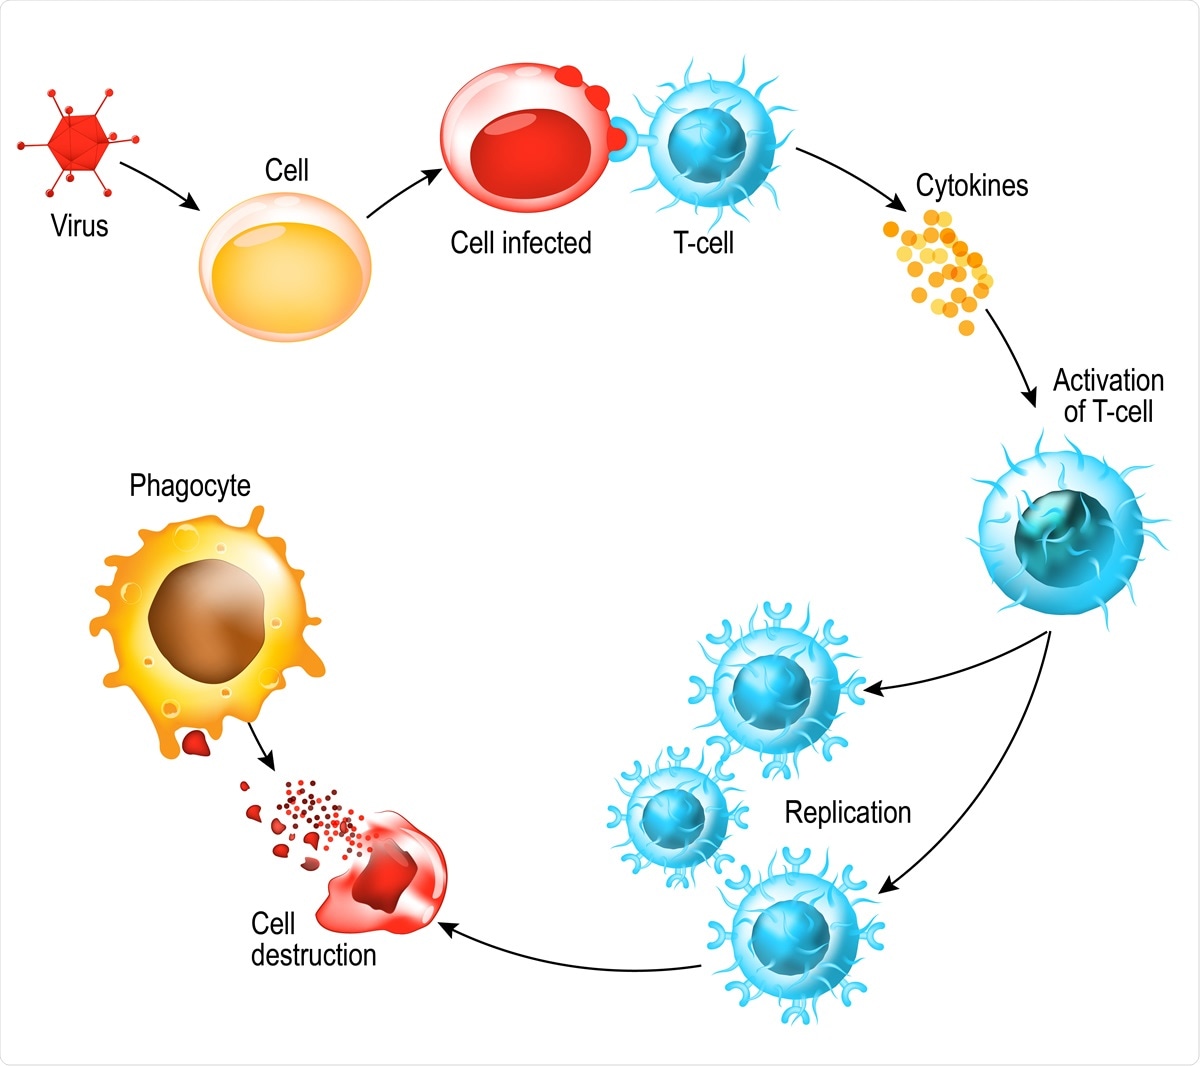 Activation of T-cell leukocytes. T-cell encounters its cognate antigen on the surface of an infected cell. T cells direct and regulate immune responses and attack infected or cancerous cells. Image Credit: Designua / Shutterstock